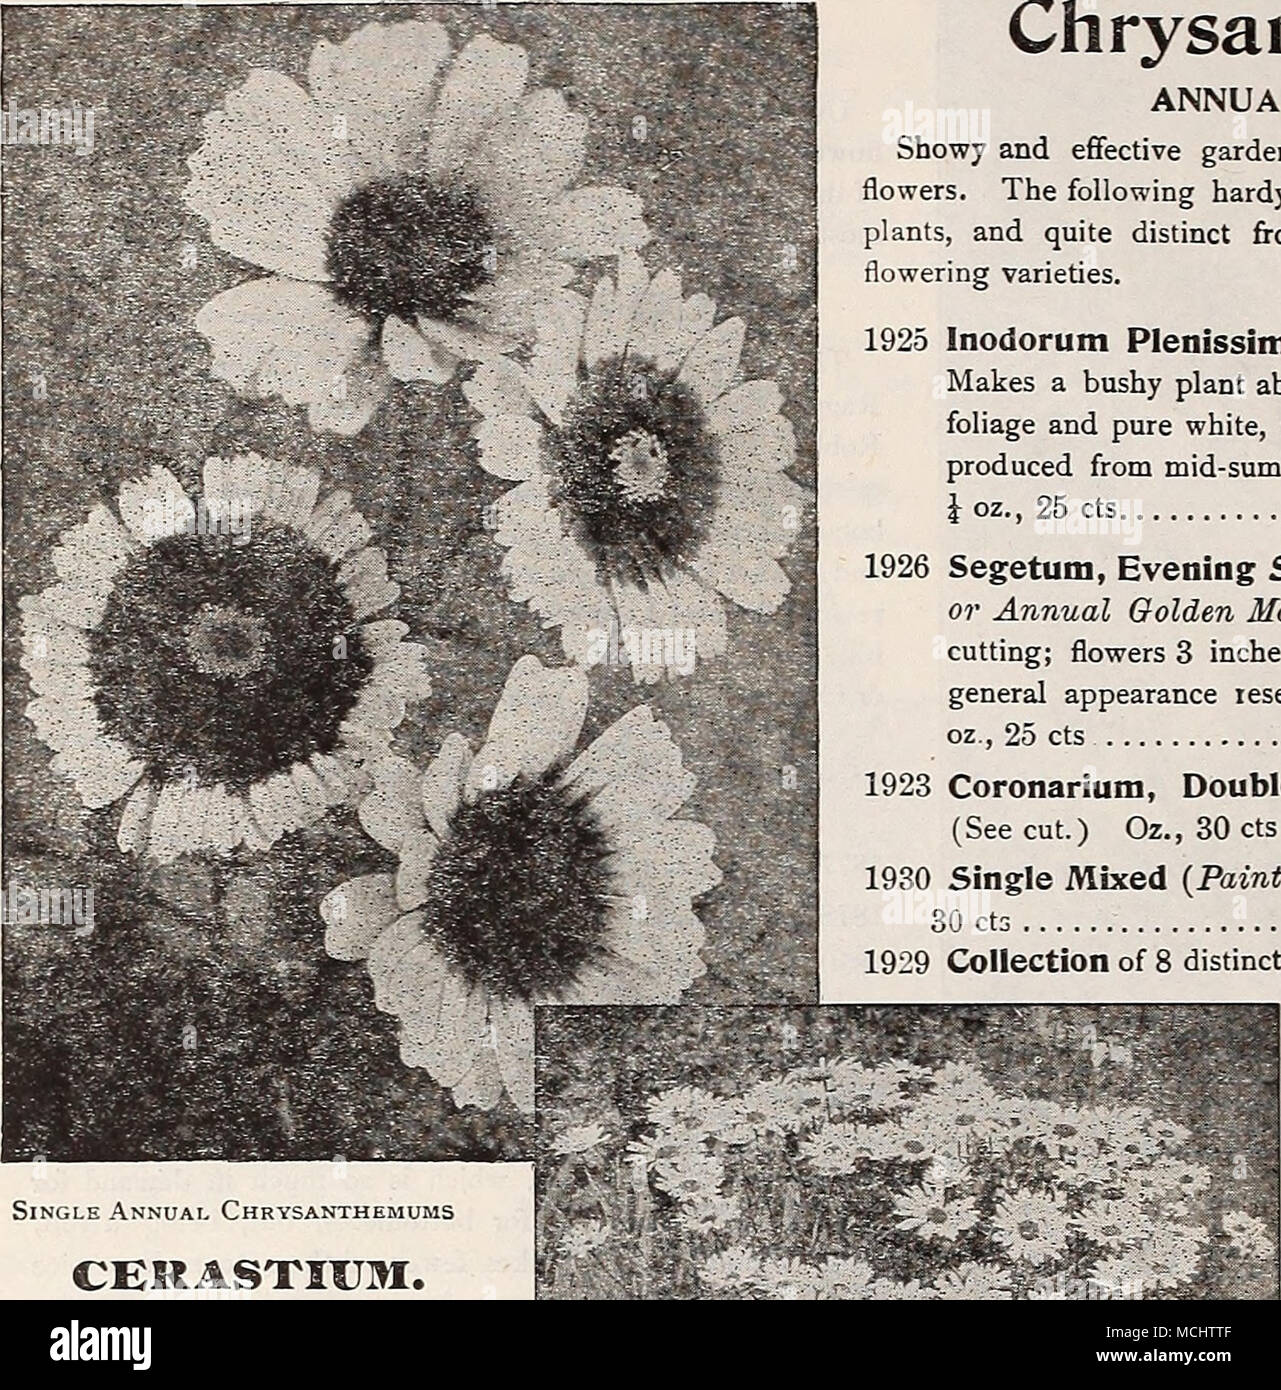 . Single Annual Chrysanthemums CERASTKJM. (Snow in Summer.) PER PKT. 1911 Tomentosum. A very pretty dwarf, white-leaved edging plant, bearing small white flowers; hardy peren- nial â 15 Chrysanthemums. PERENNIAL VARIETIES. 1944 Japanese Hybrids. Our stock of this comes to us di- rect from Japan, and is saved from a magnificent collection of over one hundred varieties, and cannot fail to produce satisfactory results. Seed sown in spring will produce flowering plants by fall 25 1945 Double Early=flowerIng. A new race which perfect their blooms in the open ground before frost. Easily grown from s Stock Photo